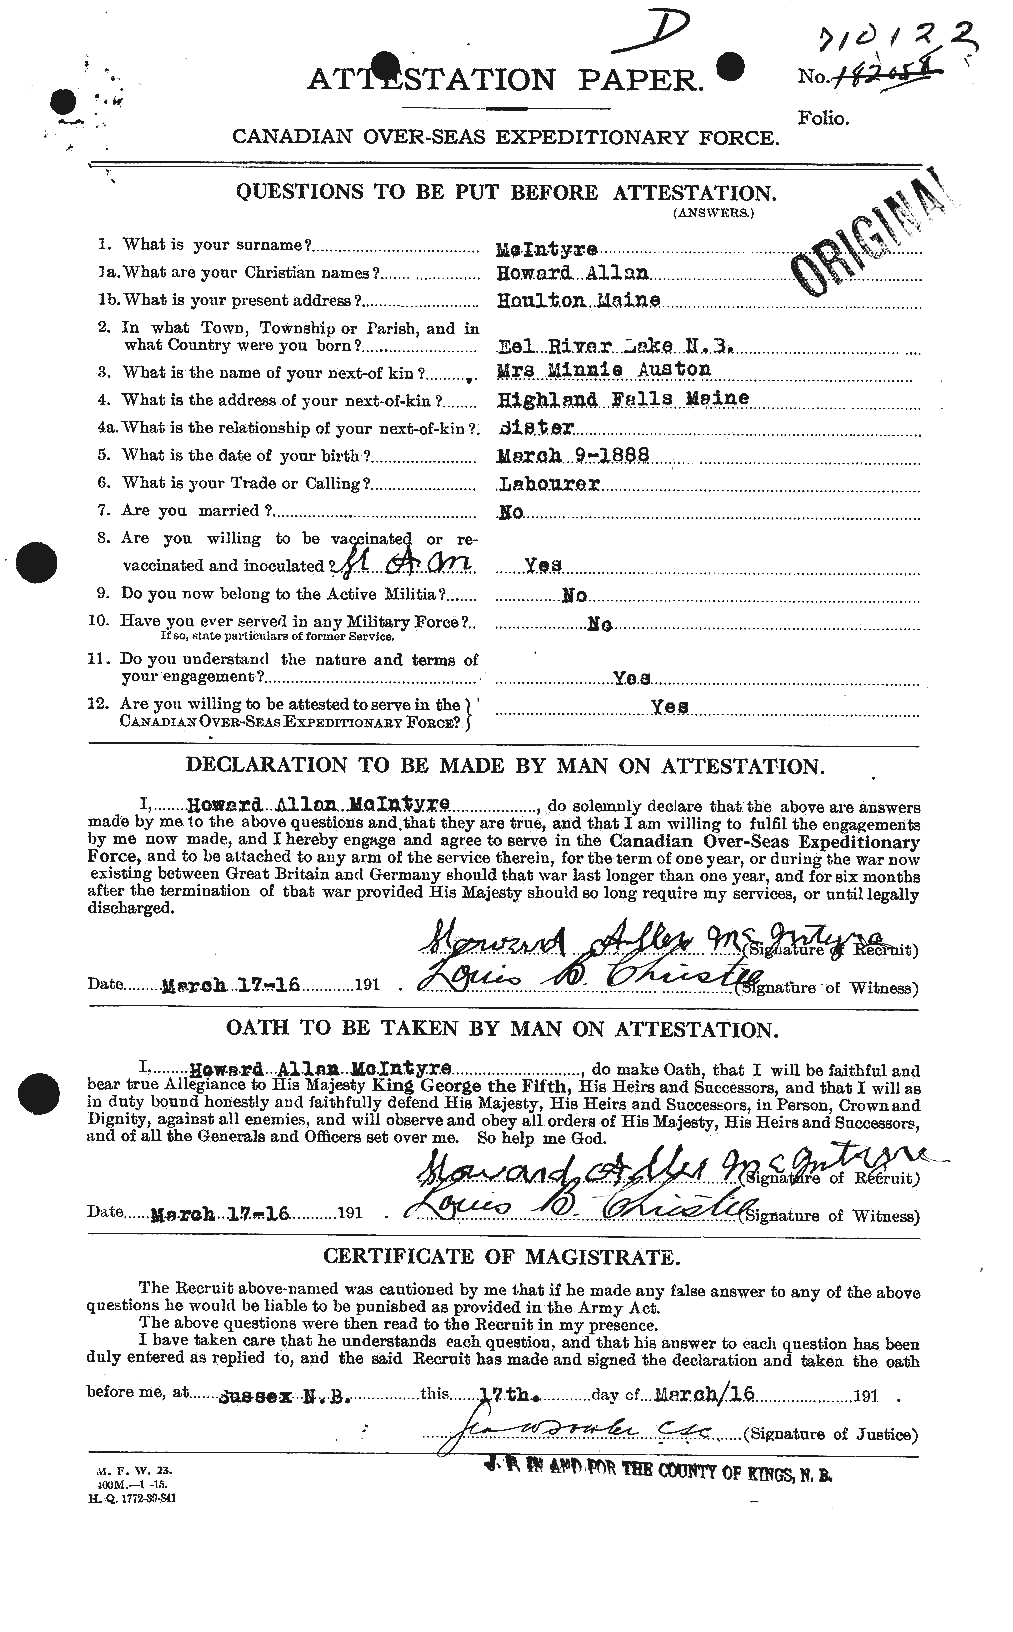 Personnel Records of the First World War - CEF 527431a